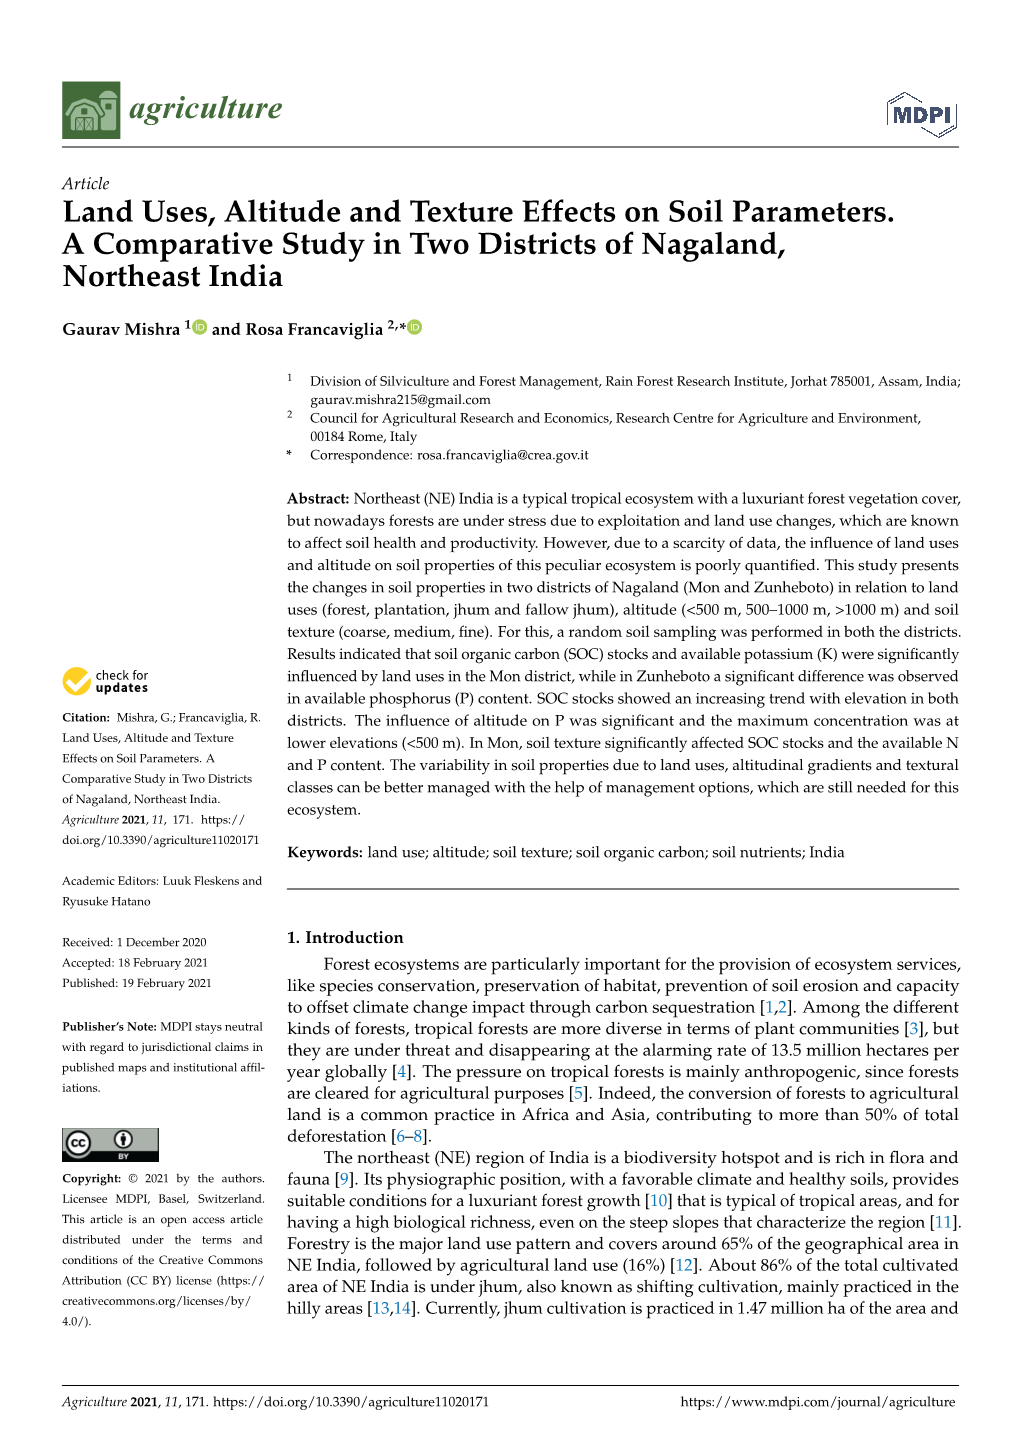 Land Uses, Altitude and Texture Effects on Soil Parameters. a Comparative Study in Two Districts of Nagaland, Northeast India